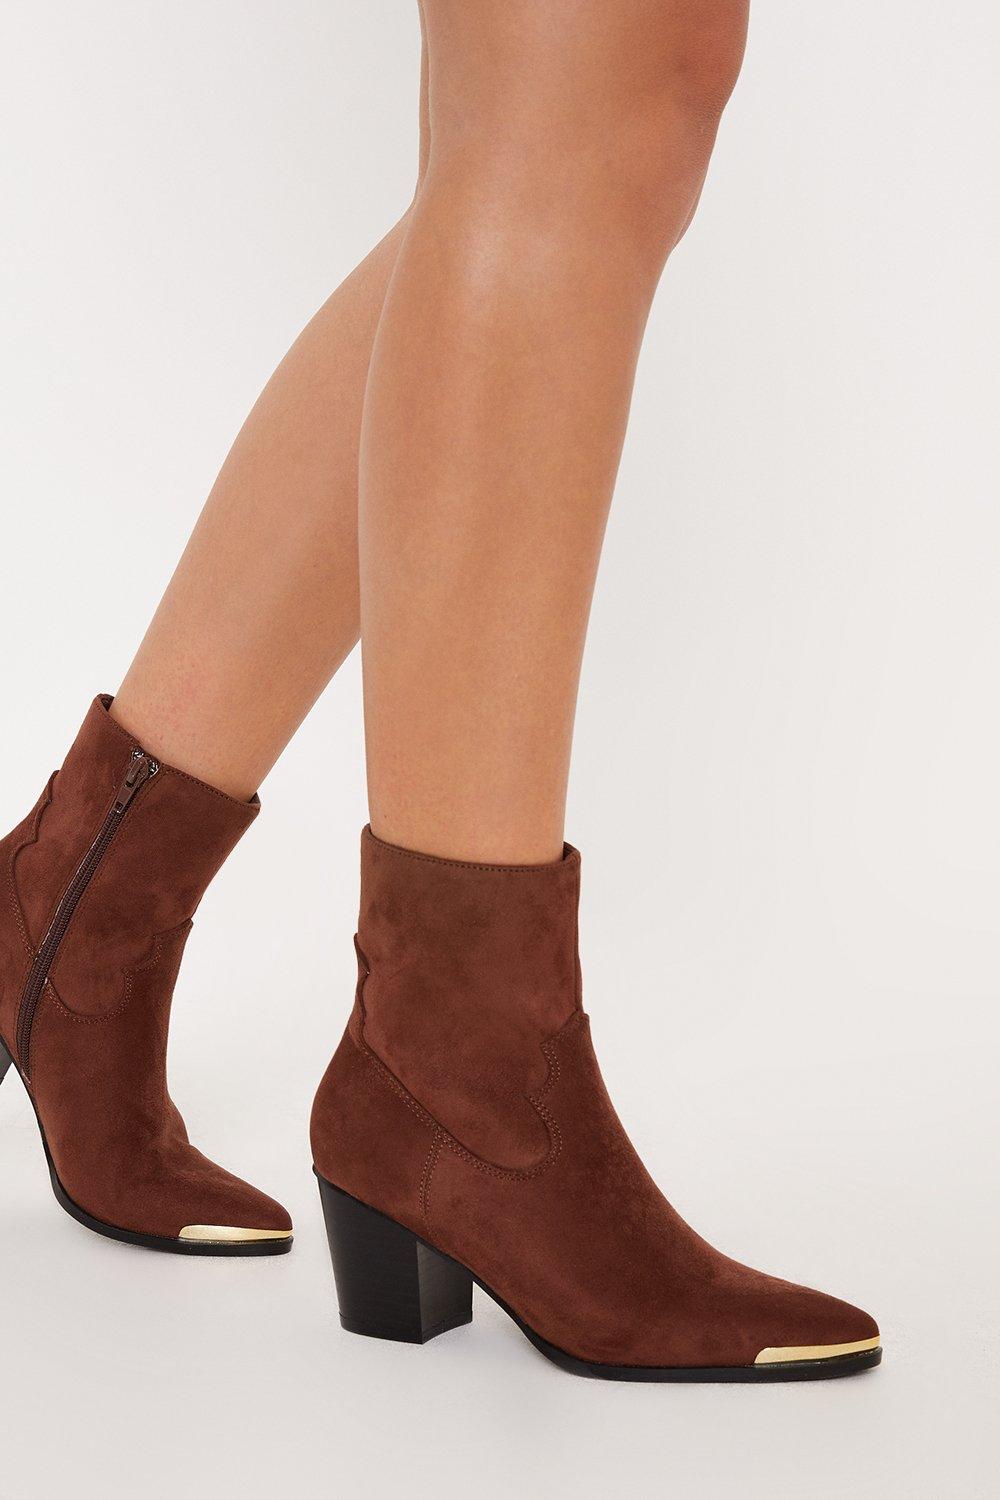 Women’s Faith: Ally Metal Detail Ankle Boots - tan - 3